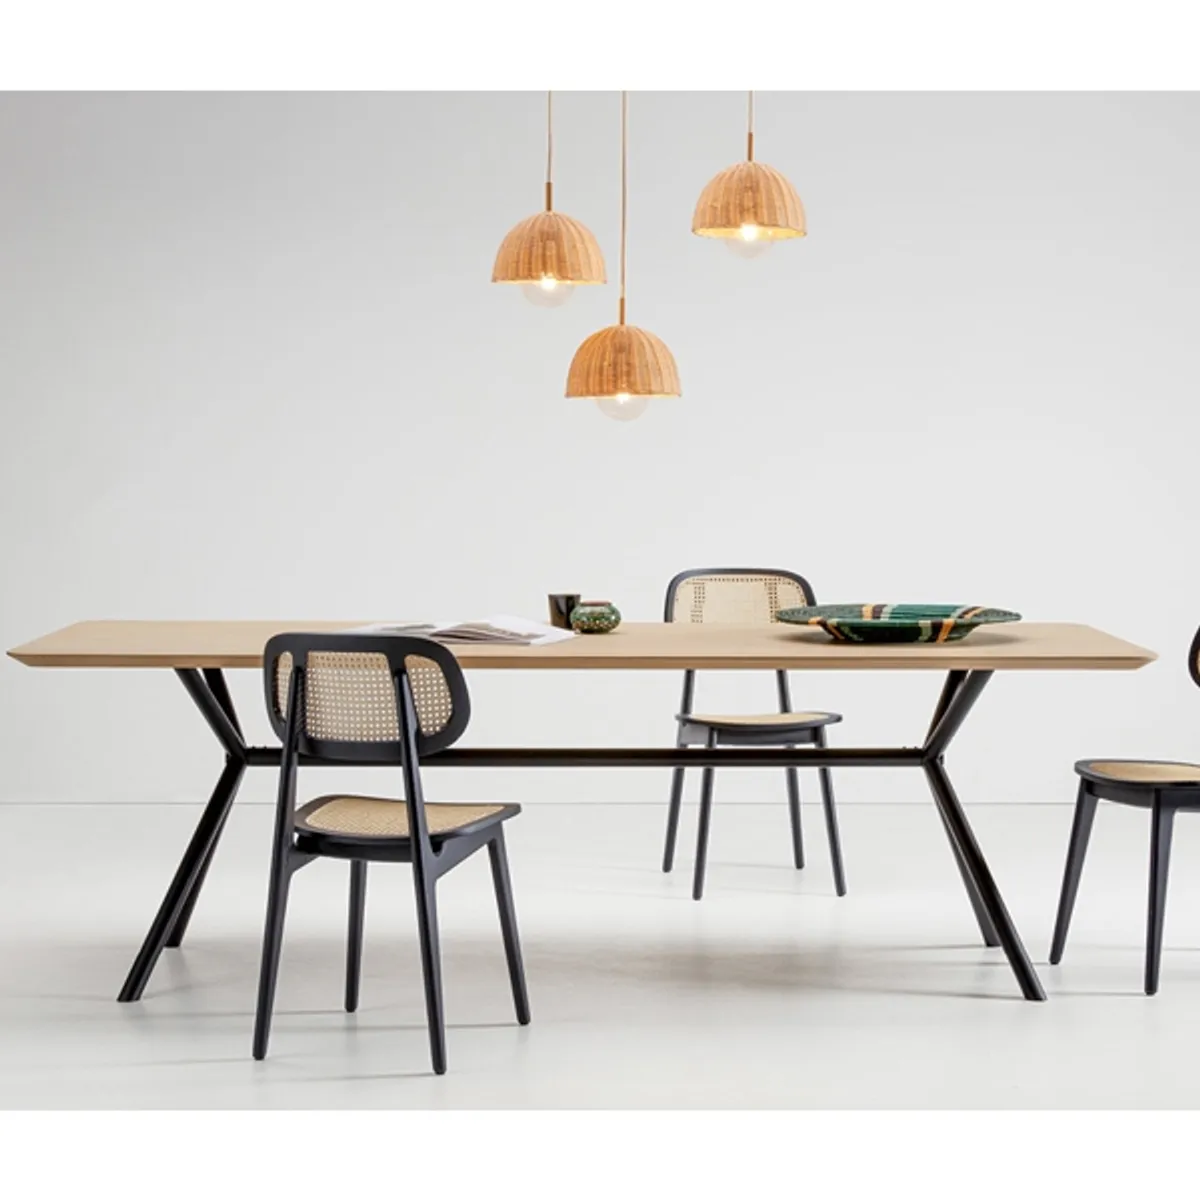 Elegantediningtable Inside Out Contracts5